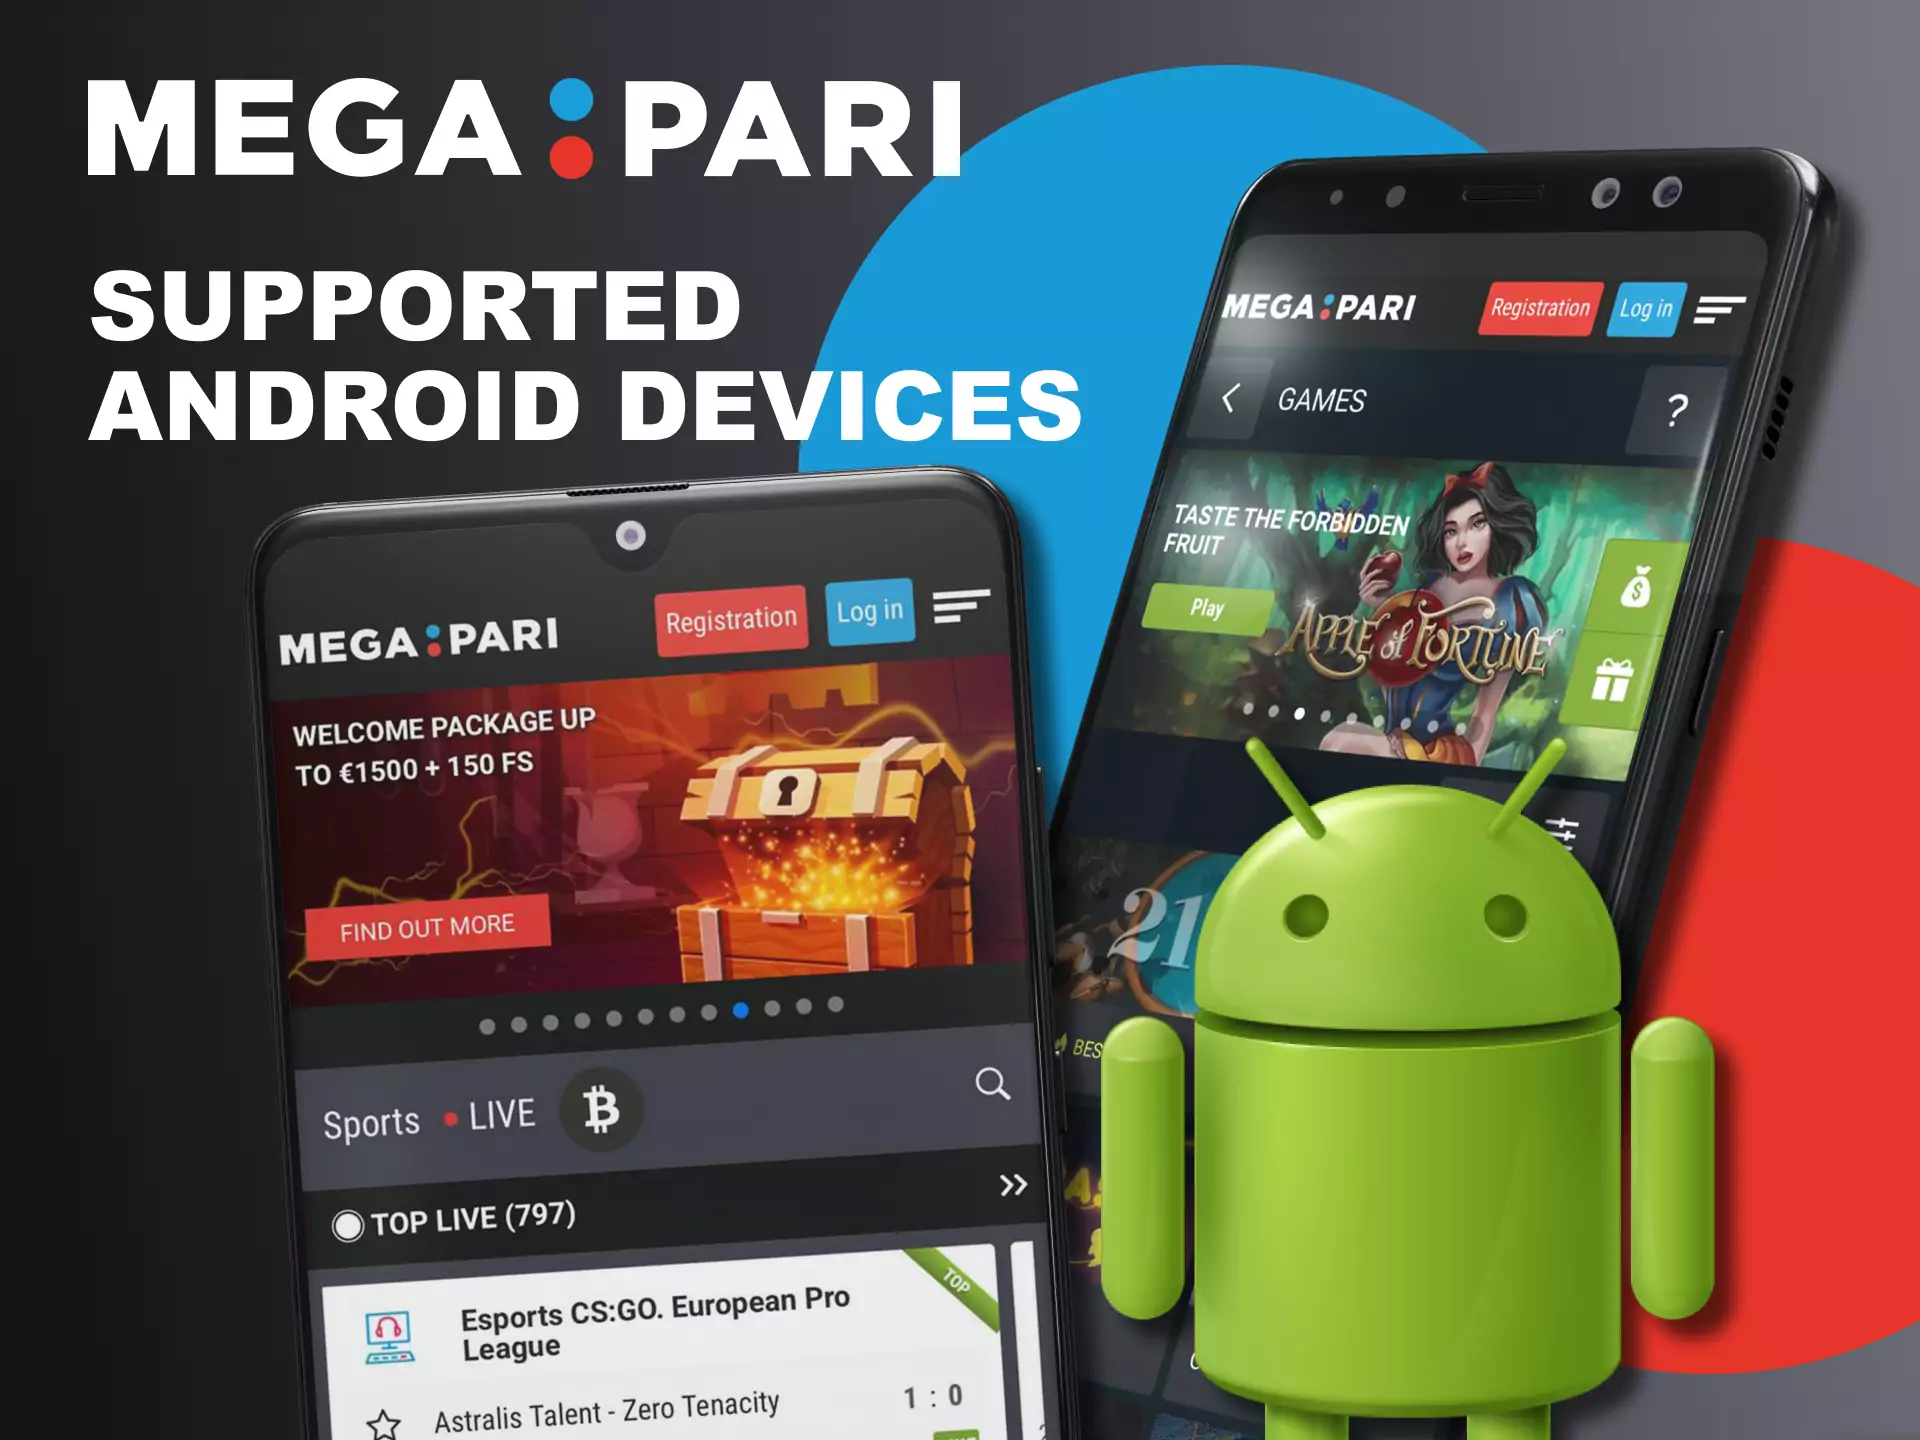 You can install the Megapari app on many Android devices.